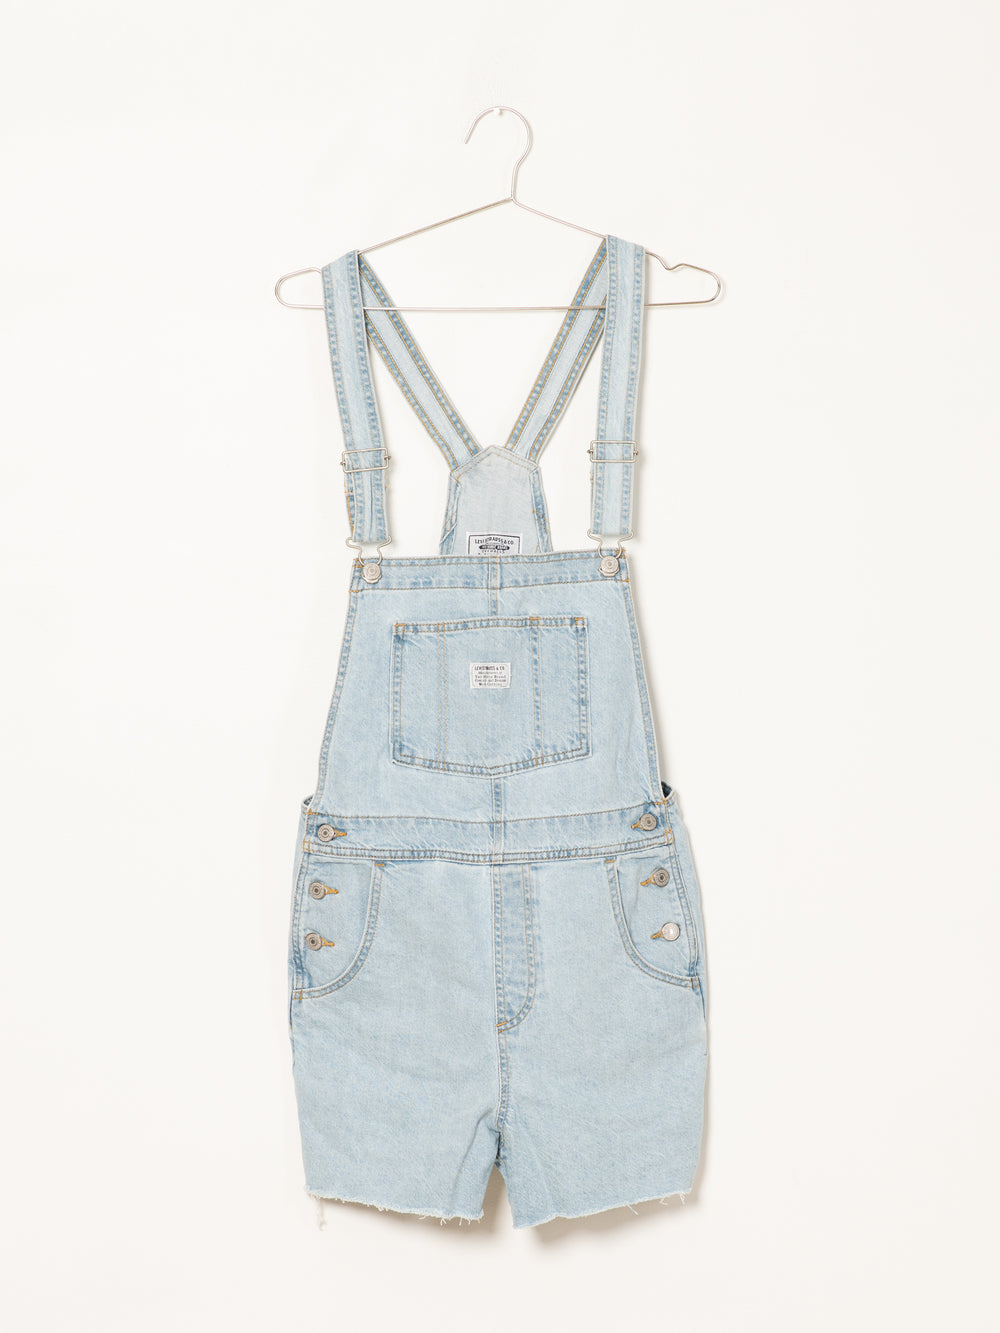 LEVIS VINTAGE SHORTALL - CLEARANCE